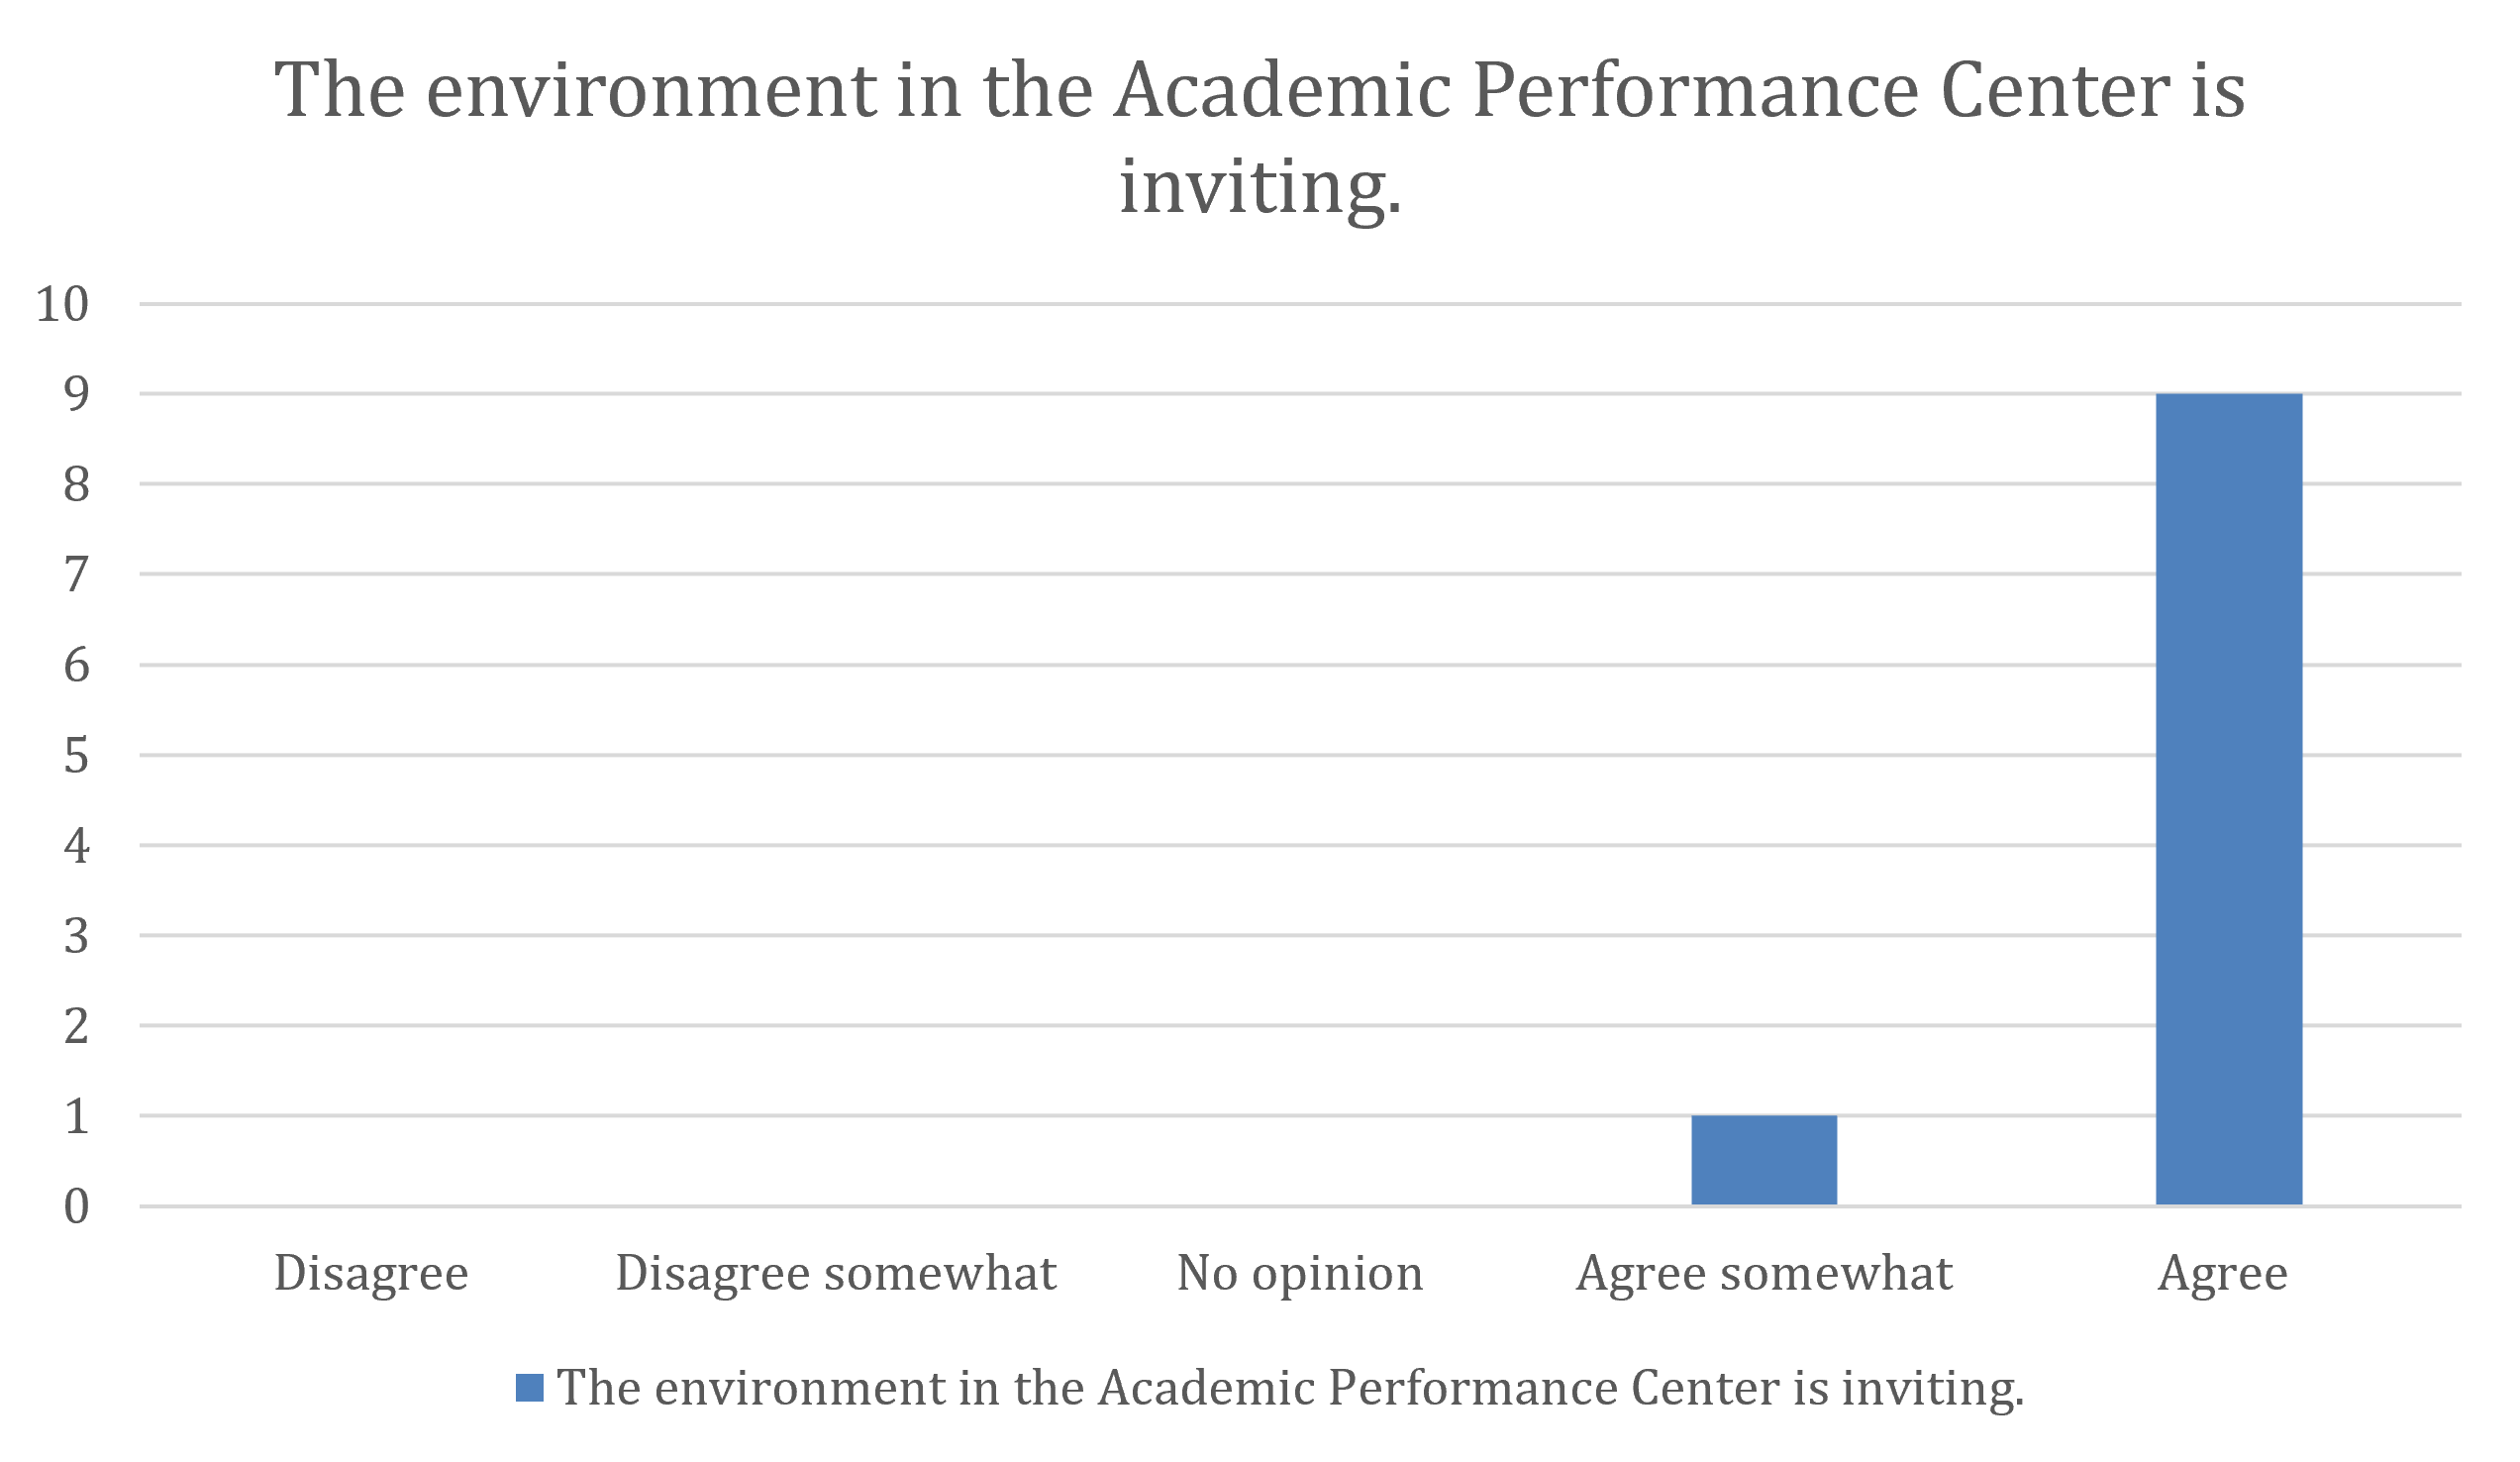 The environment in the Academic Performance Center is inviting.